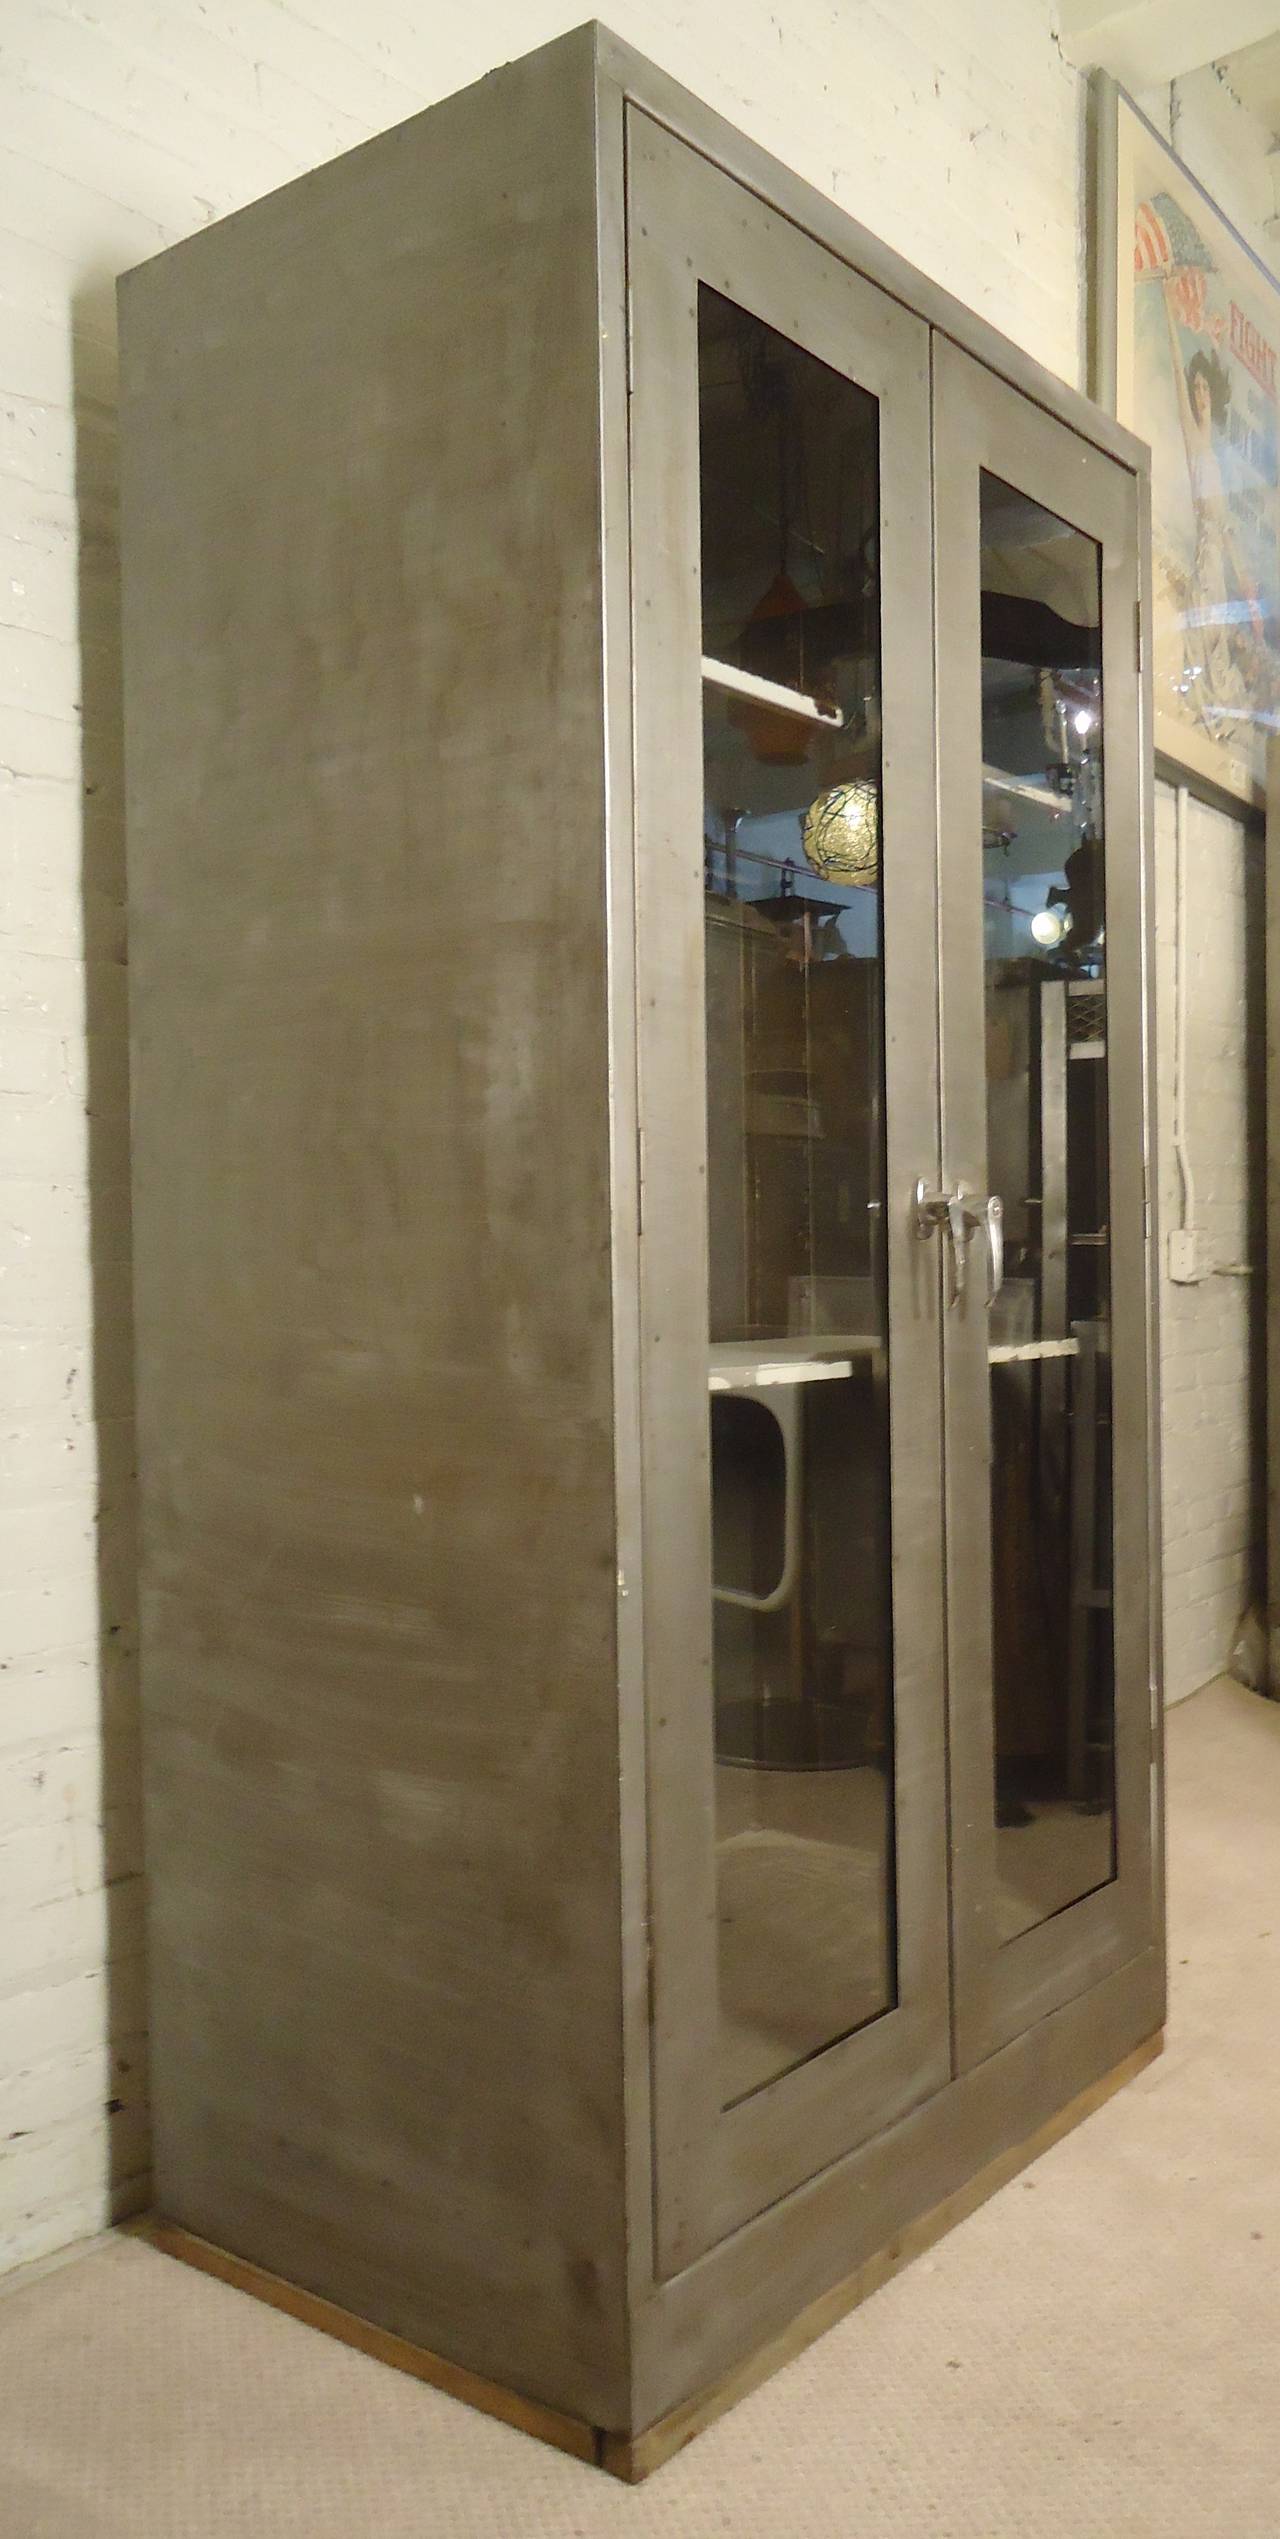 Massive vintage cabinet with latching glass front doors. Comes with two metal shelves, but can accommodate many more. Most likely used for hospital or factory storage, now restored for modern home use.

(Please confirm item location NY or NJ with